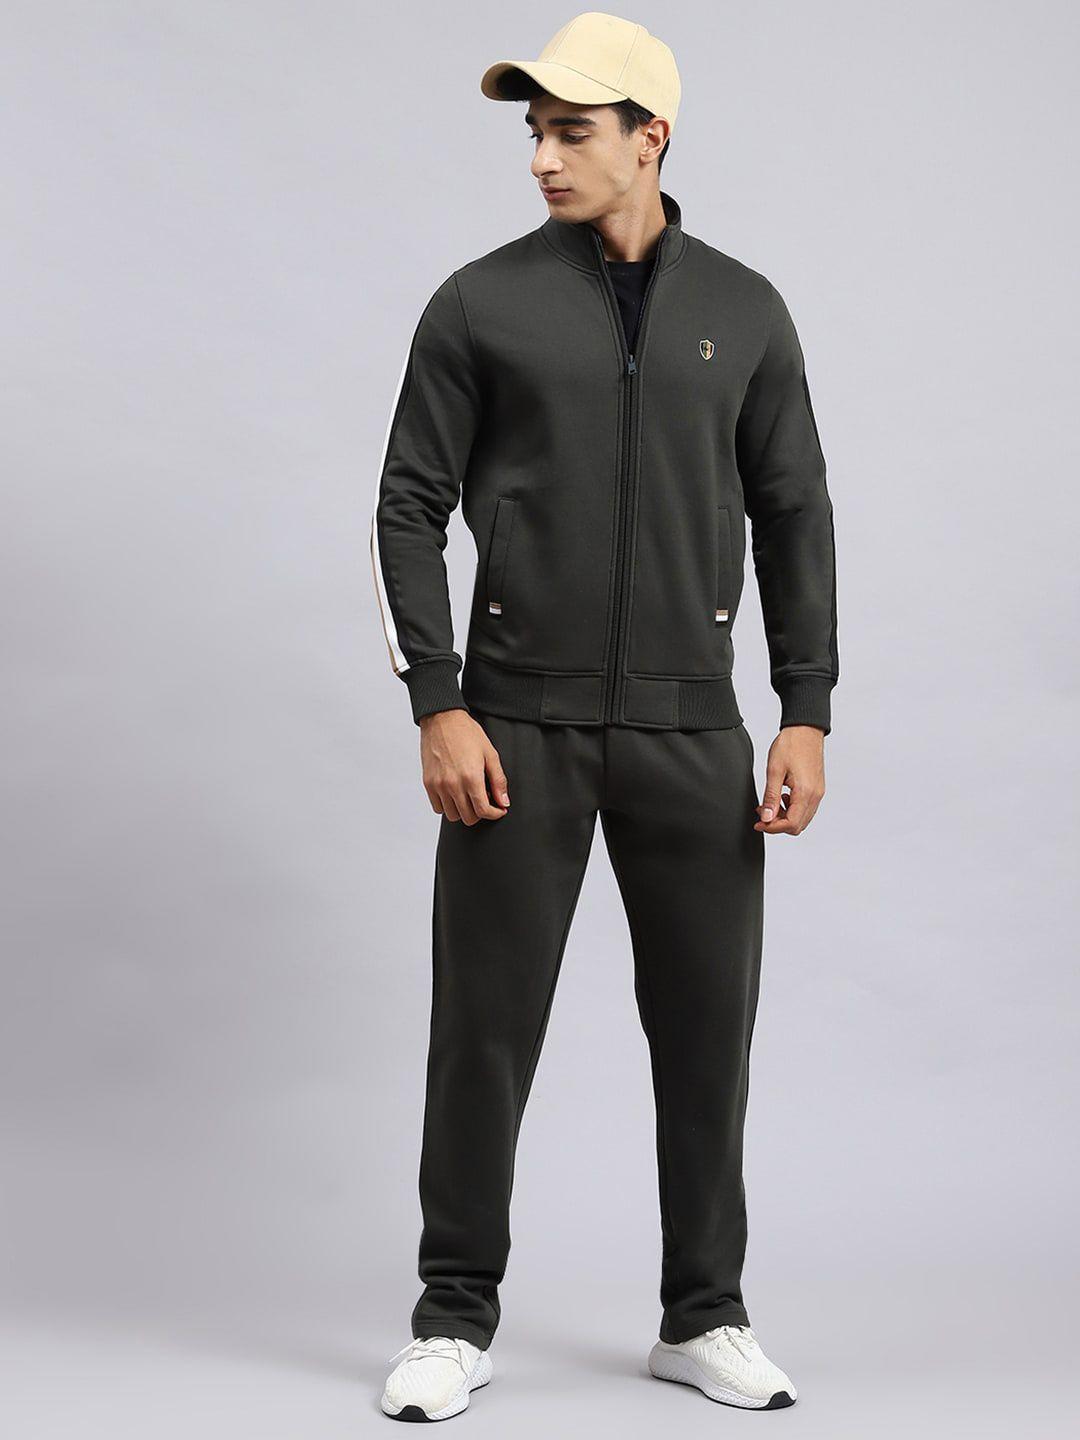 monte-carlo-mock-collar-long-sleeves-tracksuits